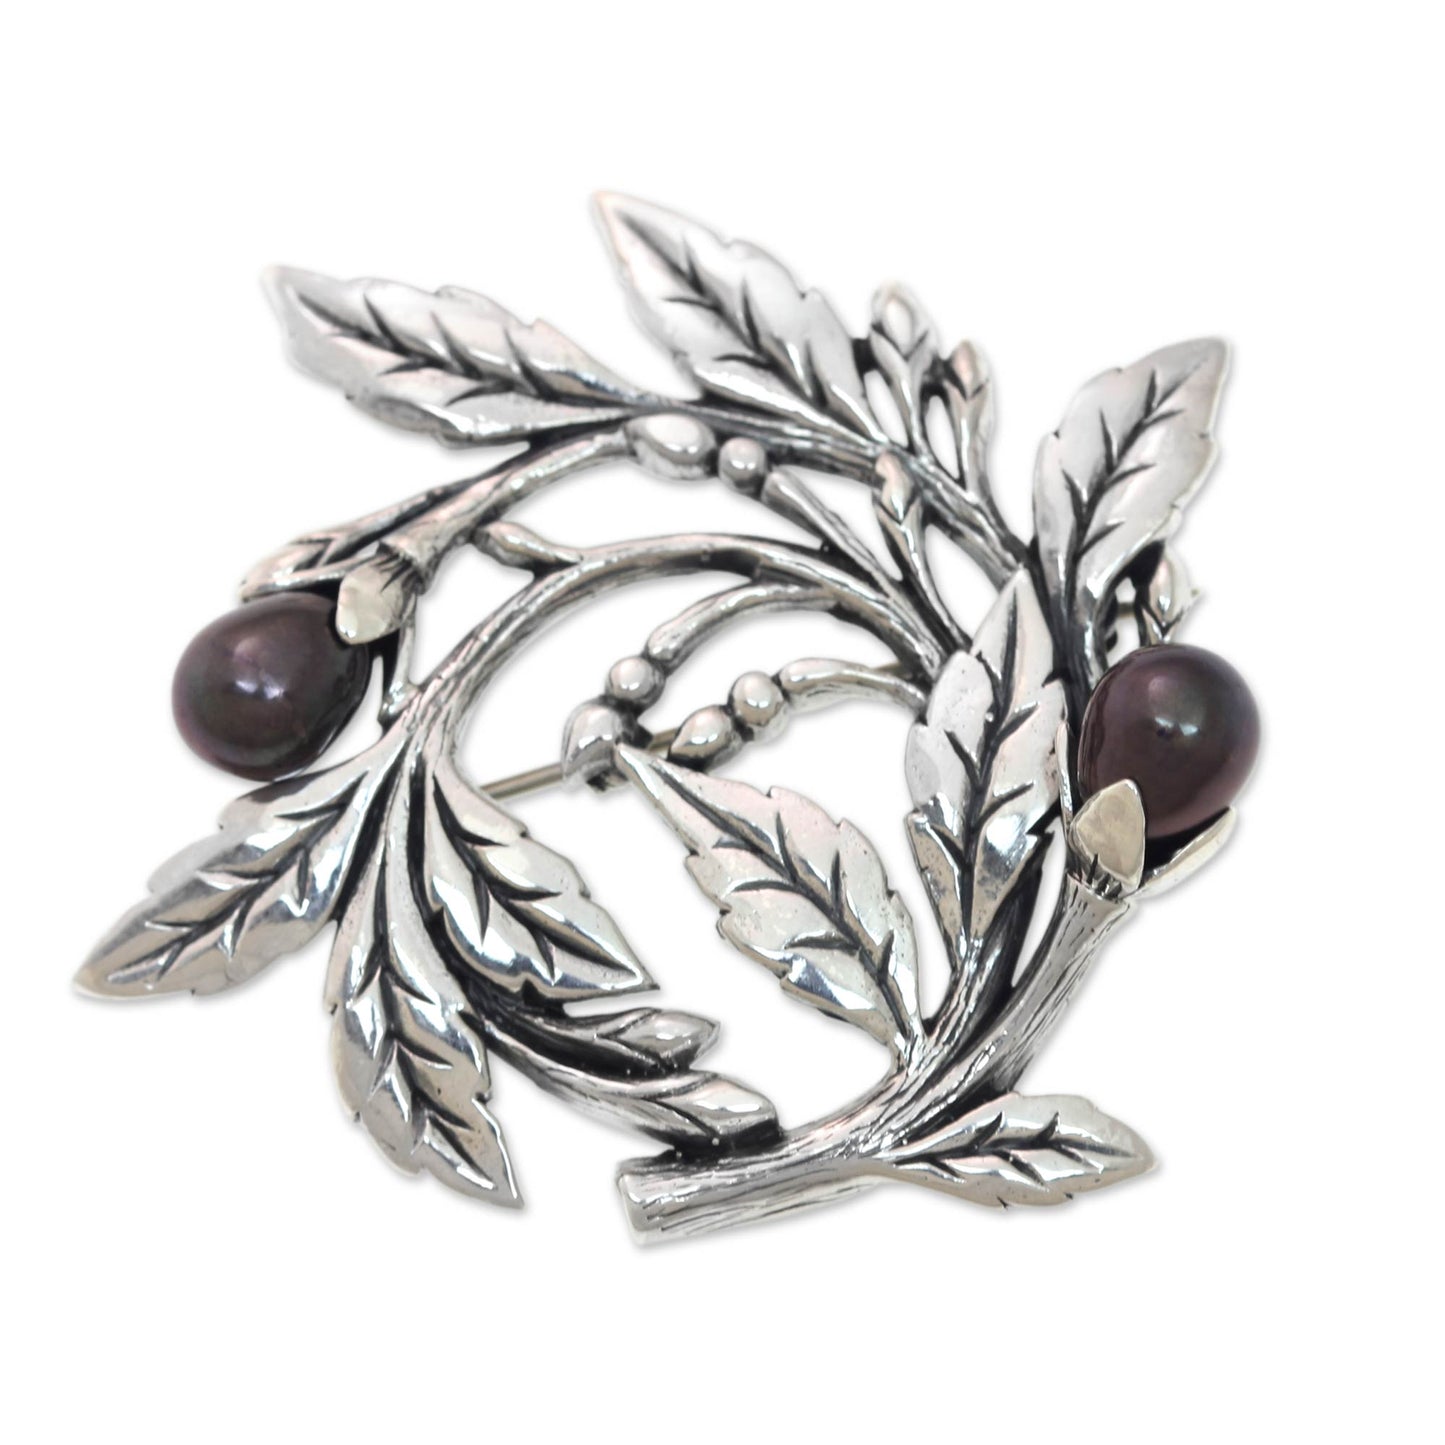 Ebony Buds Dyed Black Pearl Floral Brooch Pin